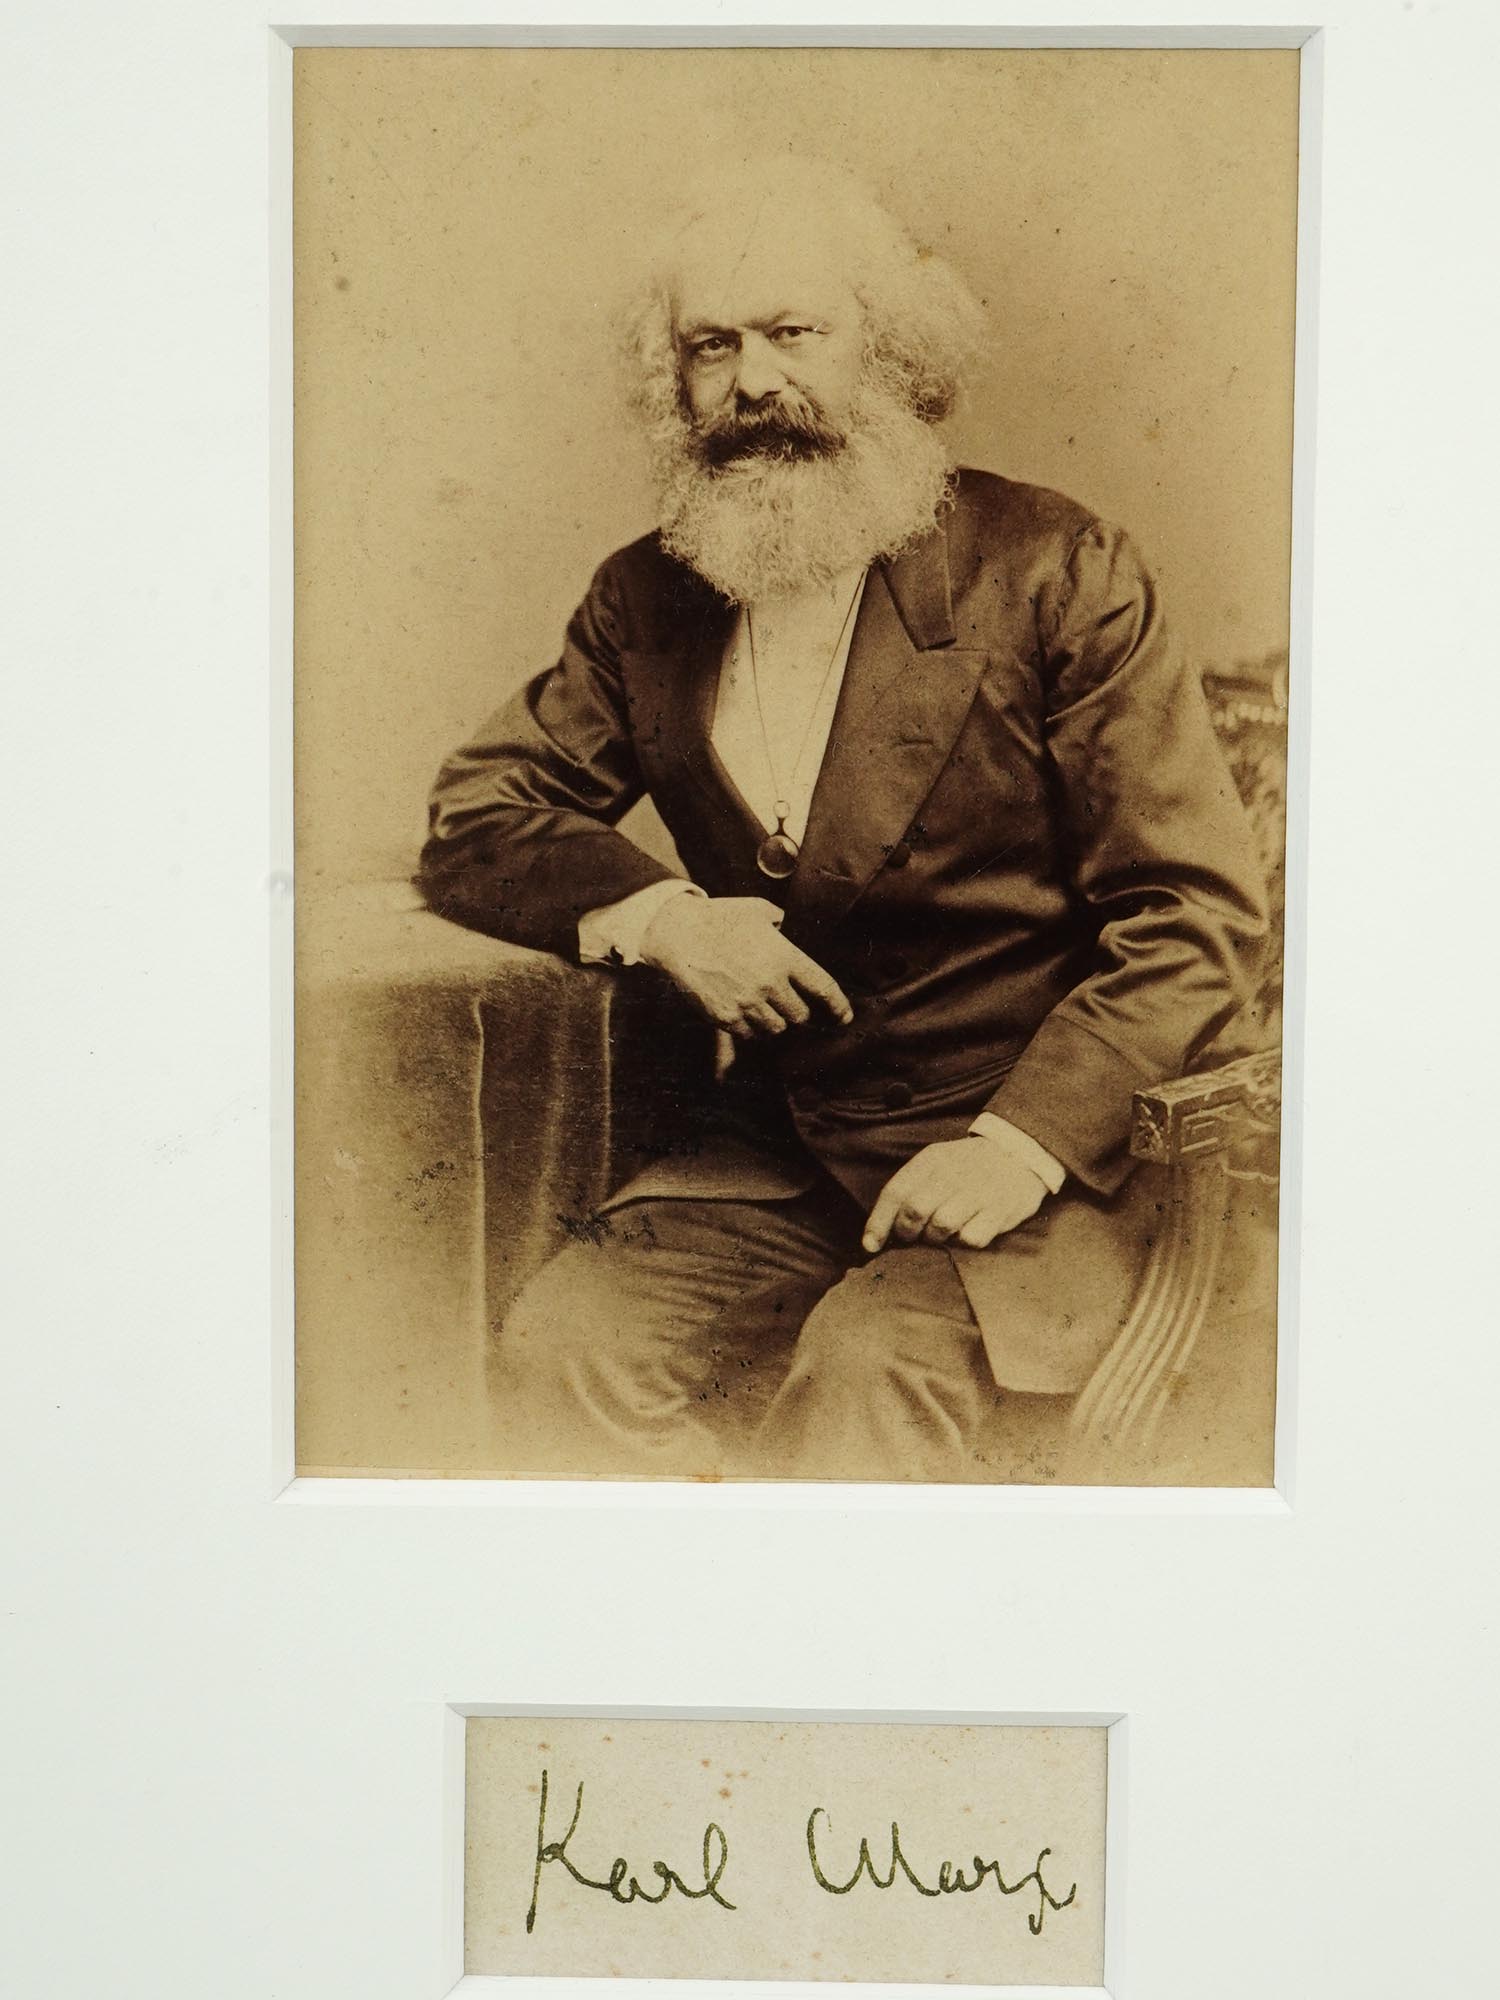 ORIGINAL 1875 PHOTO OF KARL MARX WITH AUTOGRAPH PIC-1